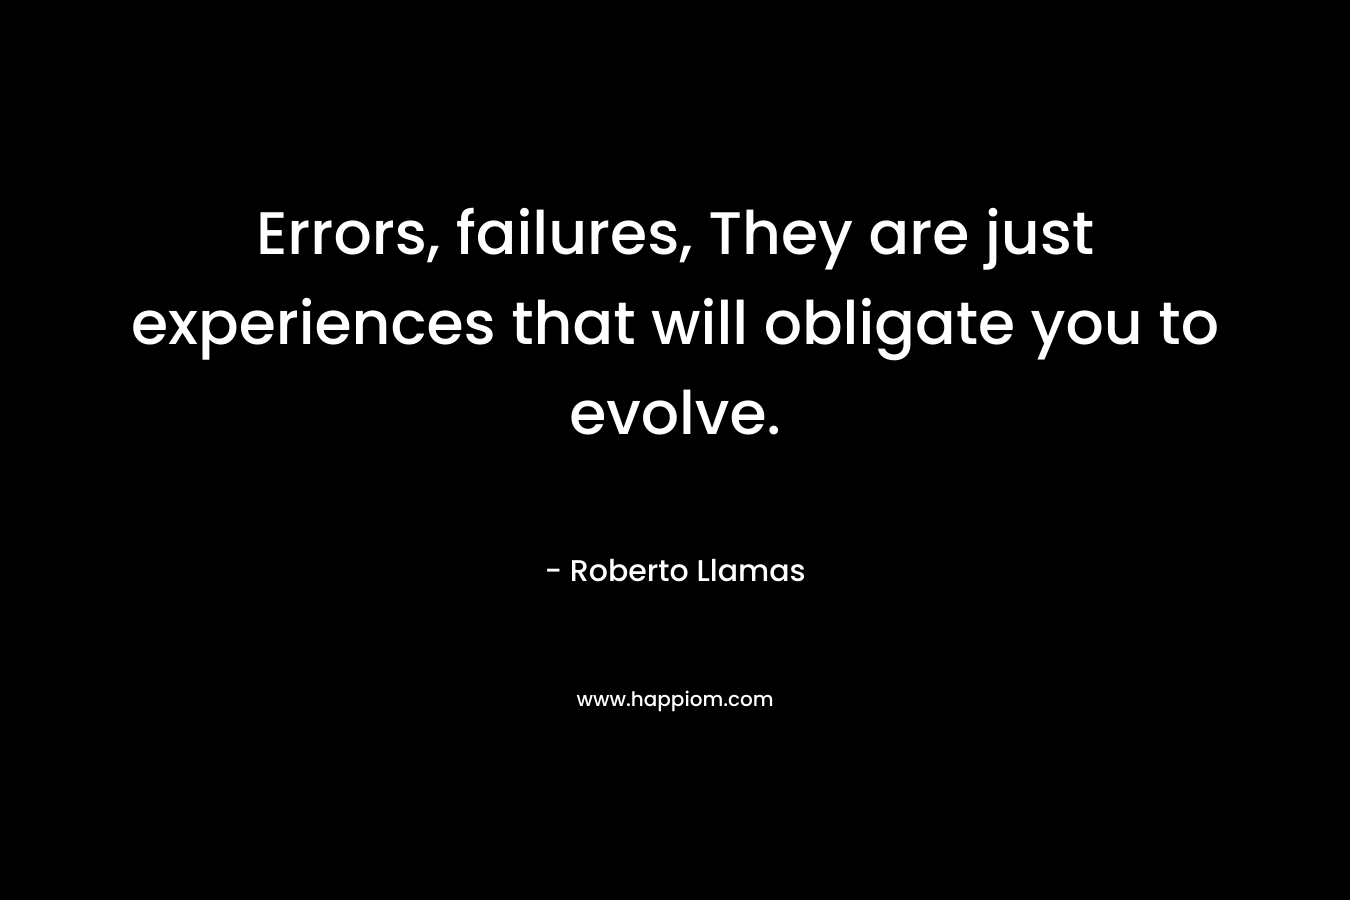 Errors, failures, They are just experiences that will obligate you to evolve.